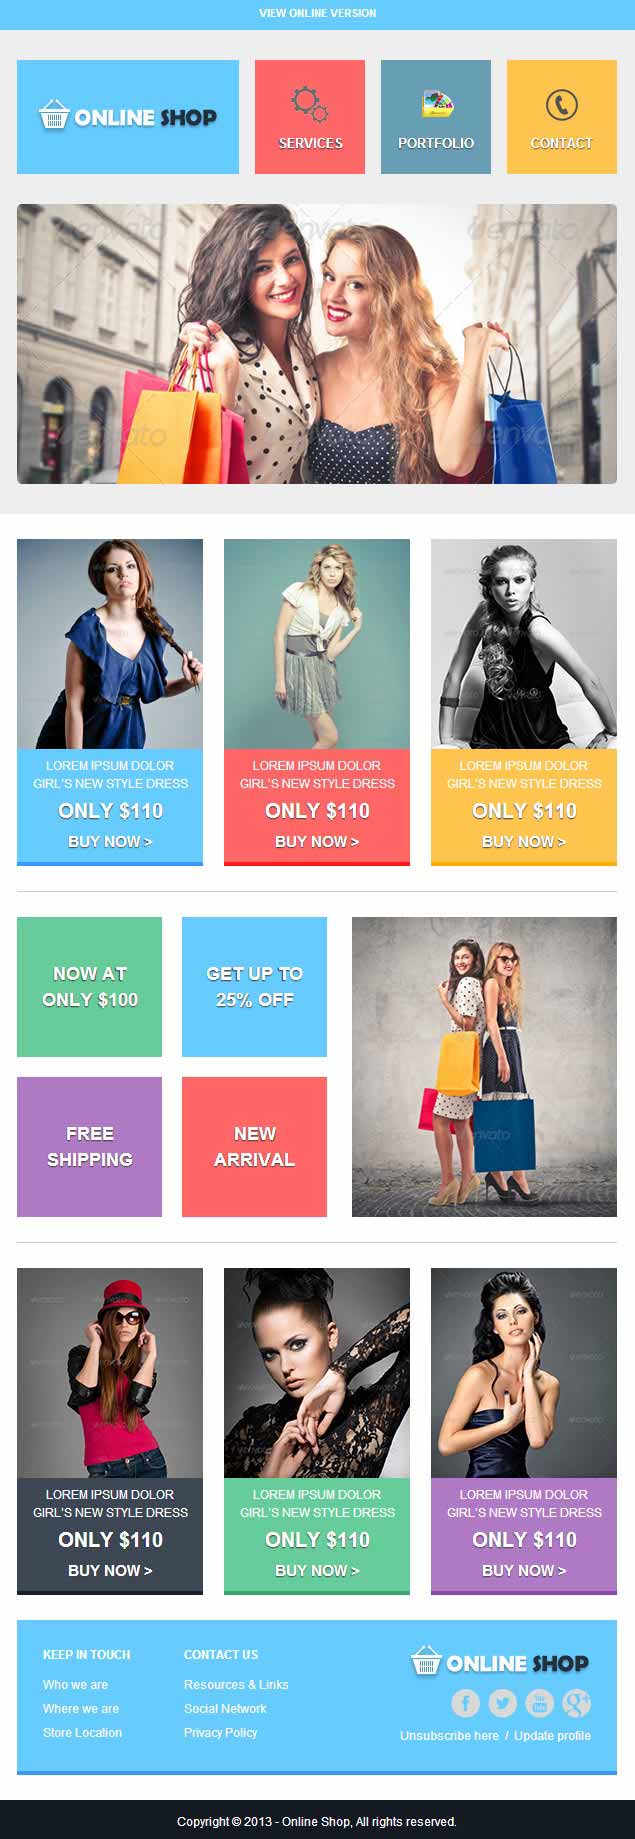 OnlineShop Professional Responsive Email Template